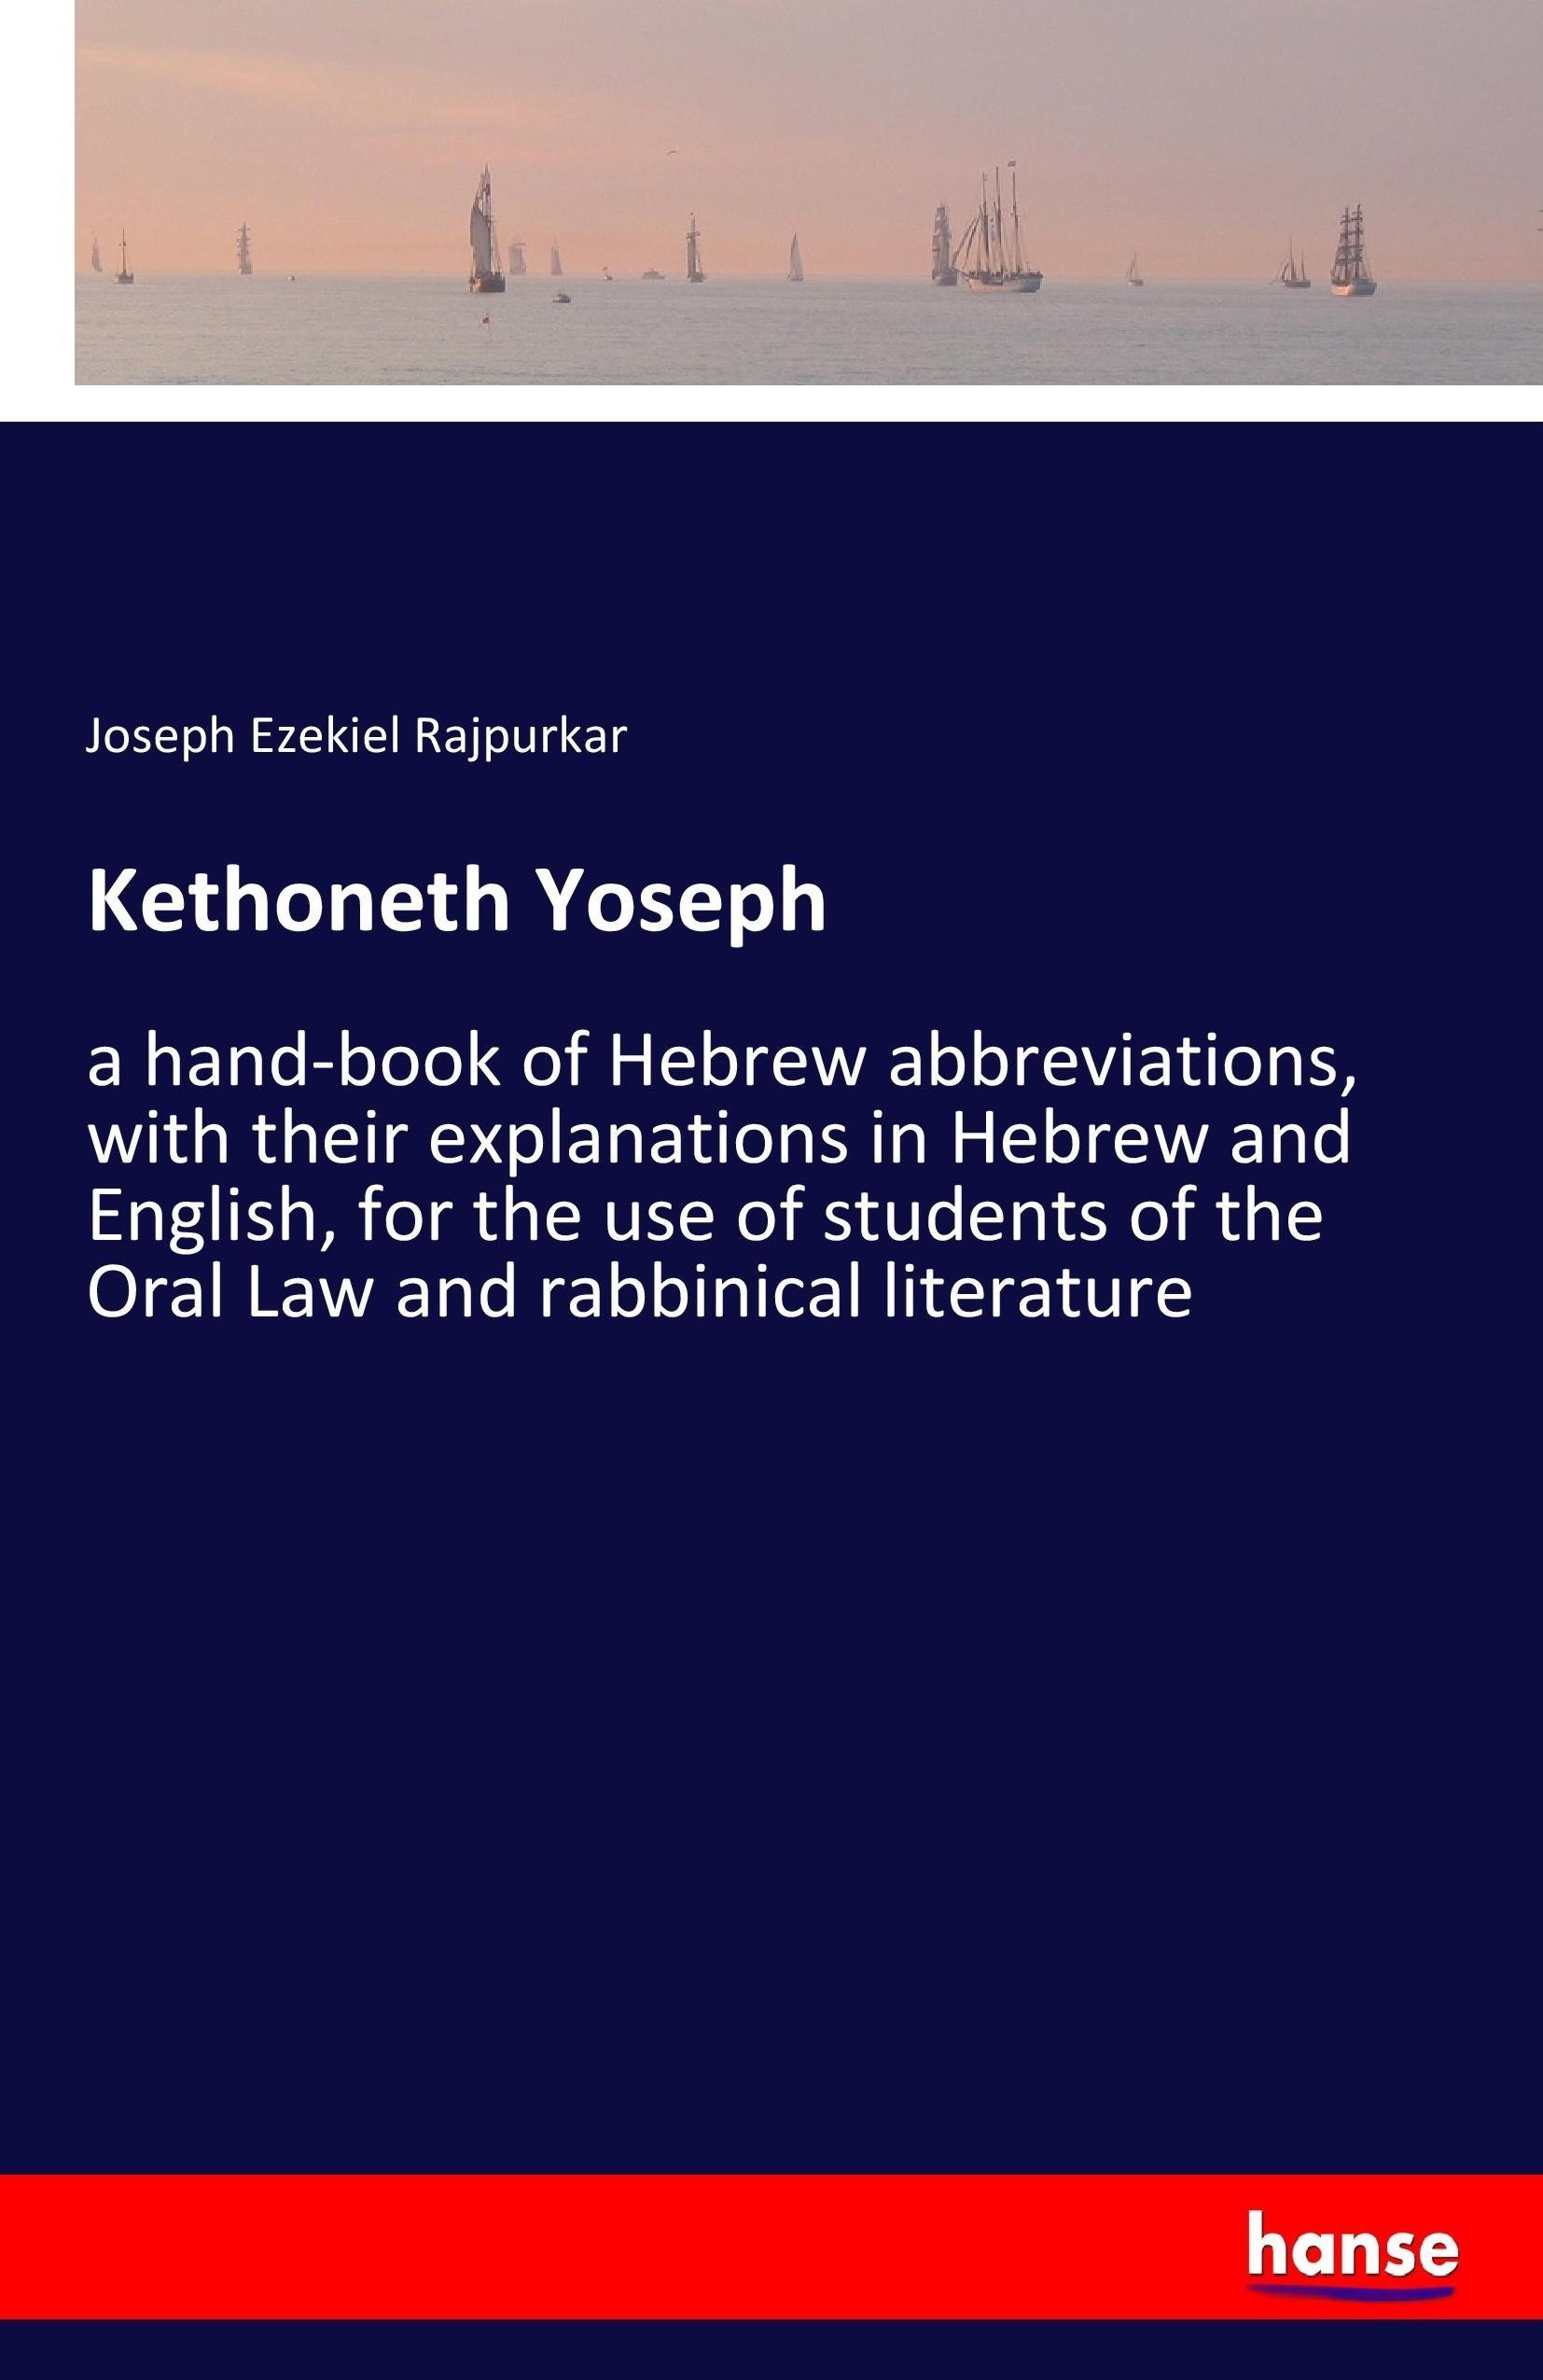 Kethoneth Yoseph | a hand-book of Hebrew abbreviations, with their explanations in Hebrew and English, for the use of students of the Oral Law and rabbinical literature | Joseph Ezekiel Rajpurkar - Rajpurkar, Joseph Ezekiel